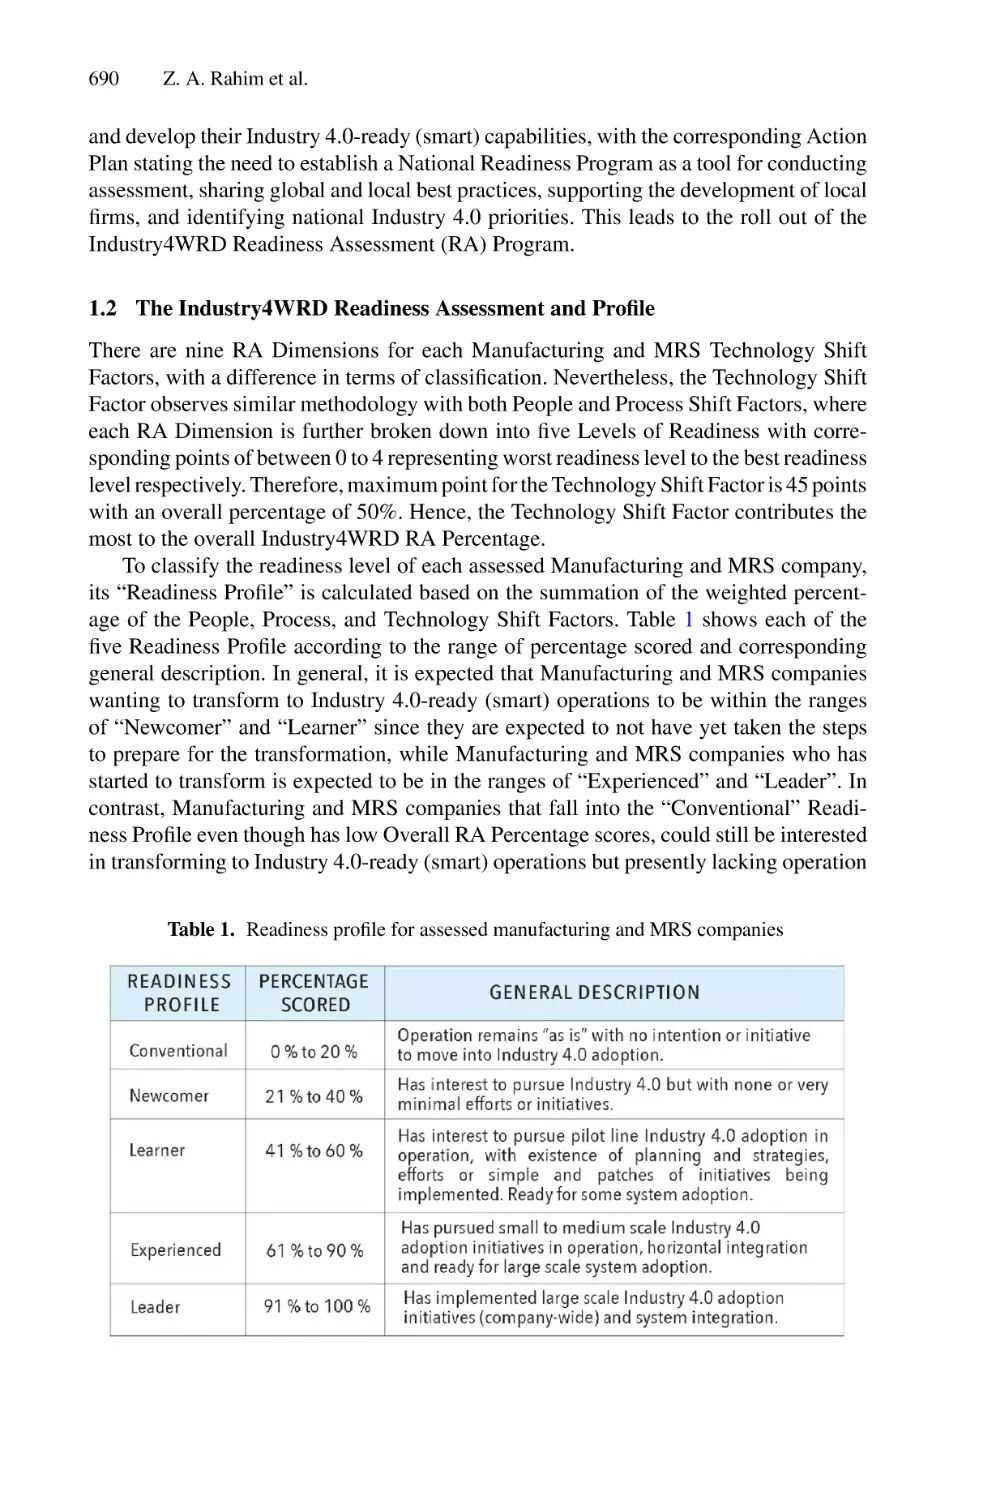 1.2 The Industry4WRD Readiness Assessment and Profile